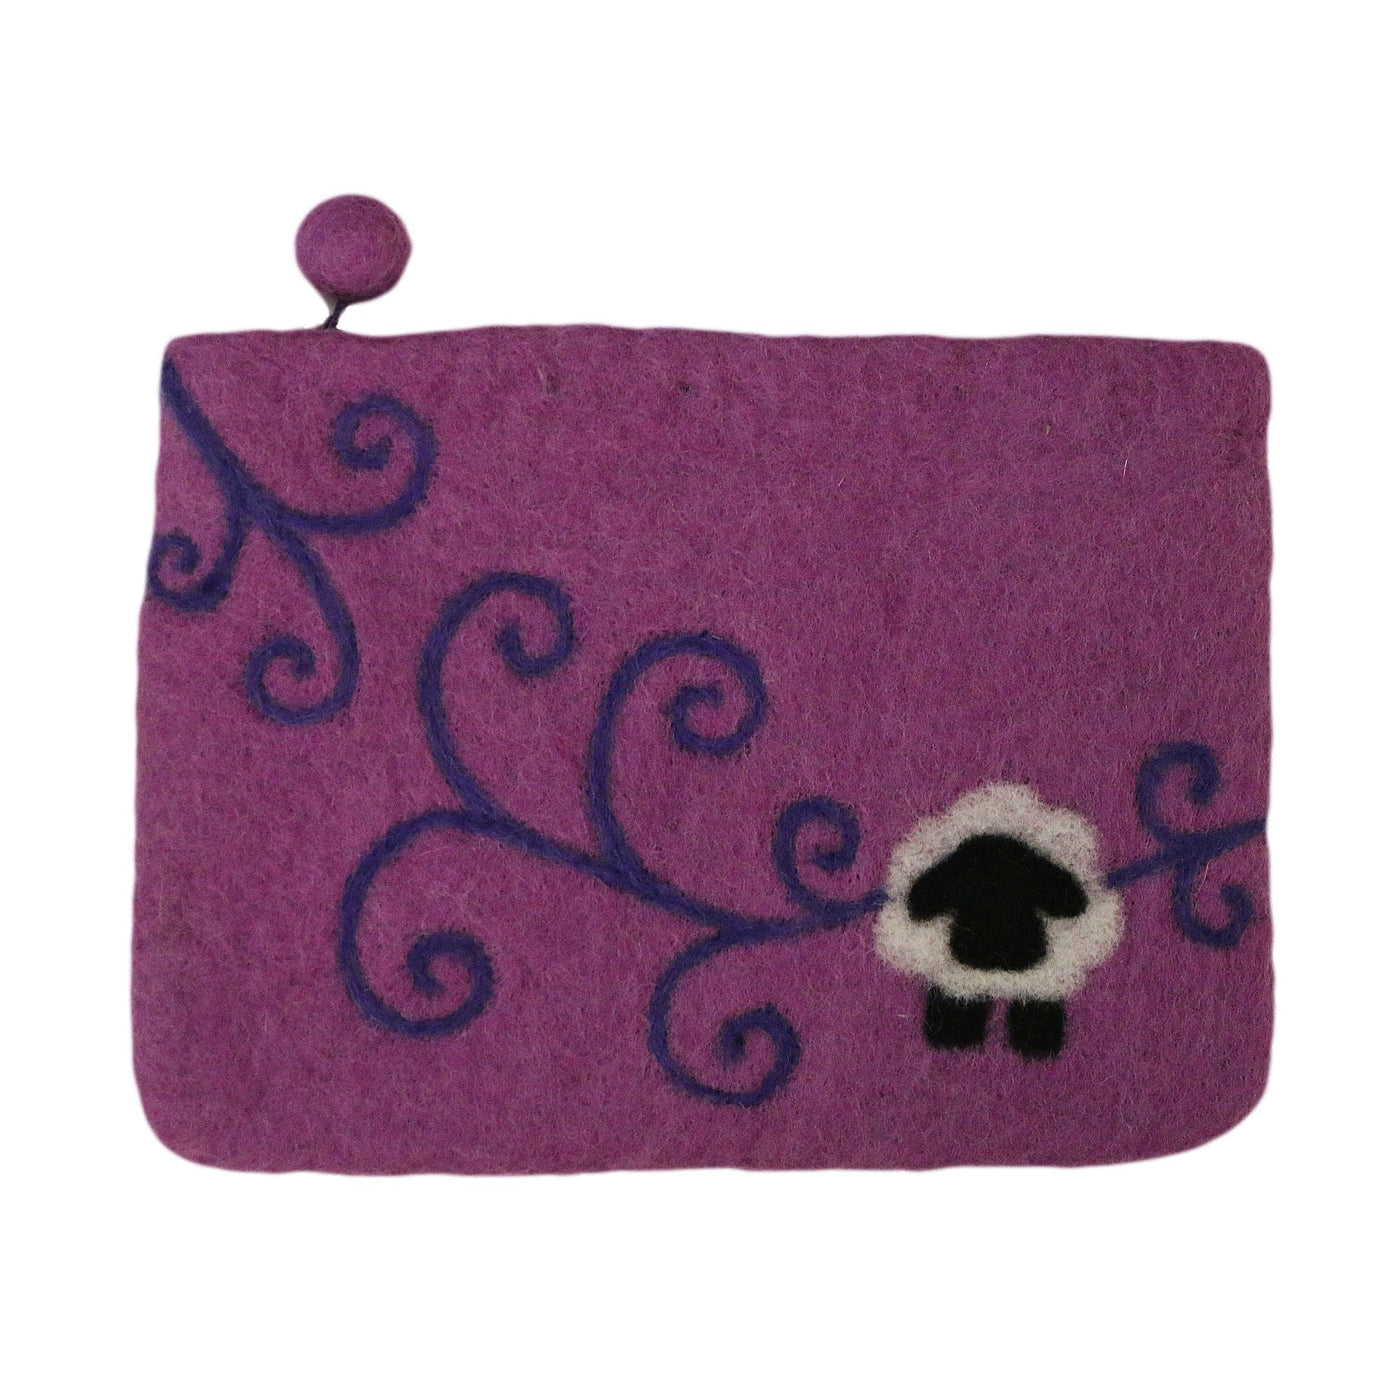 Sheep with Swirls Notions Bag